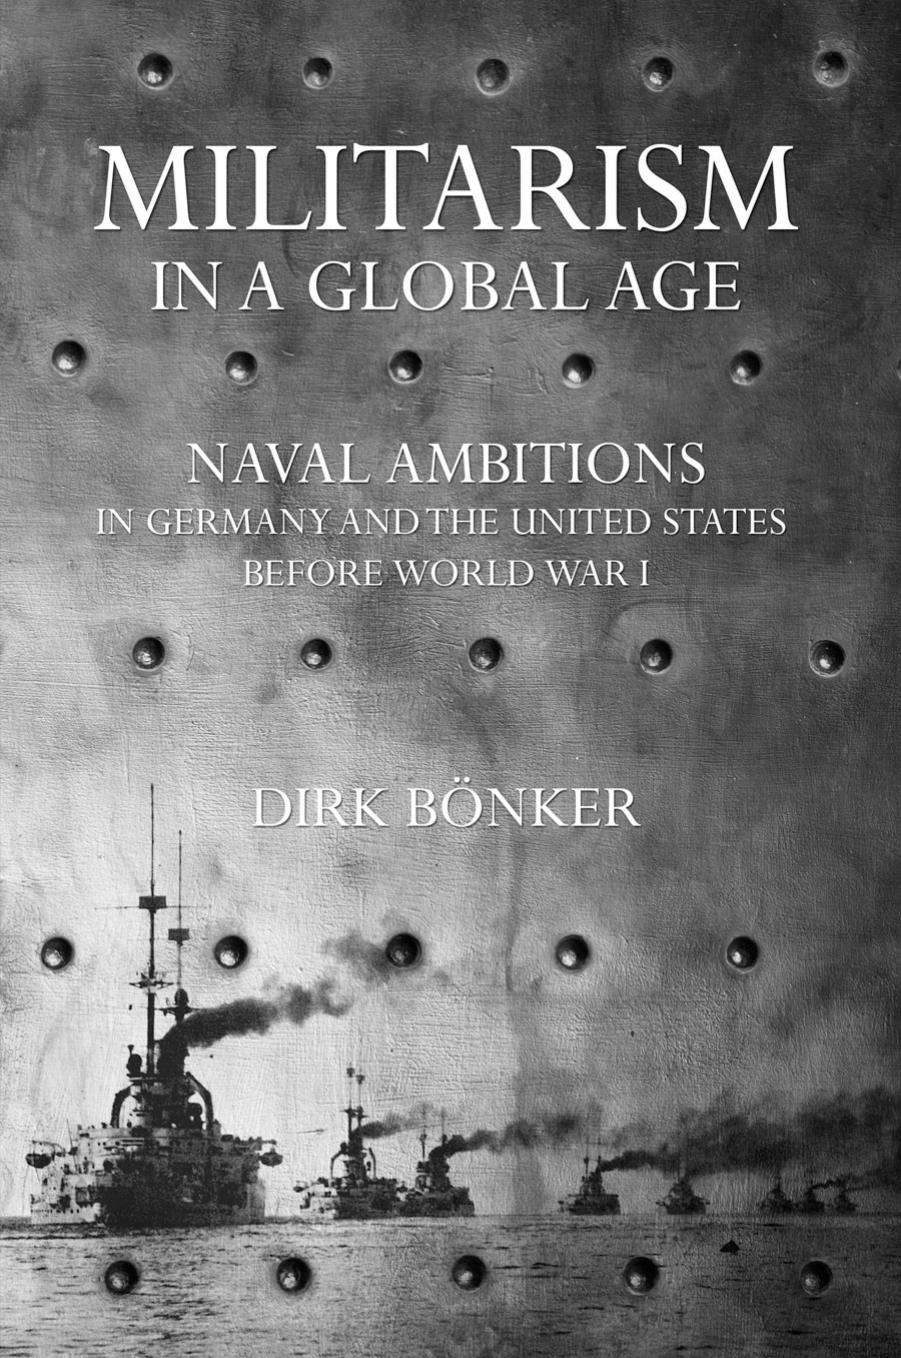 Militarism in a Global Age: Naval Ambitions in Germany and the United States before World War I by by Dirk Bönker